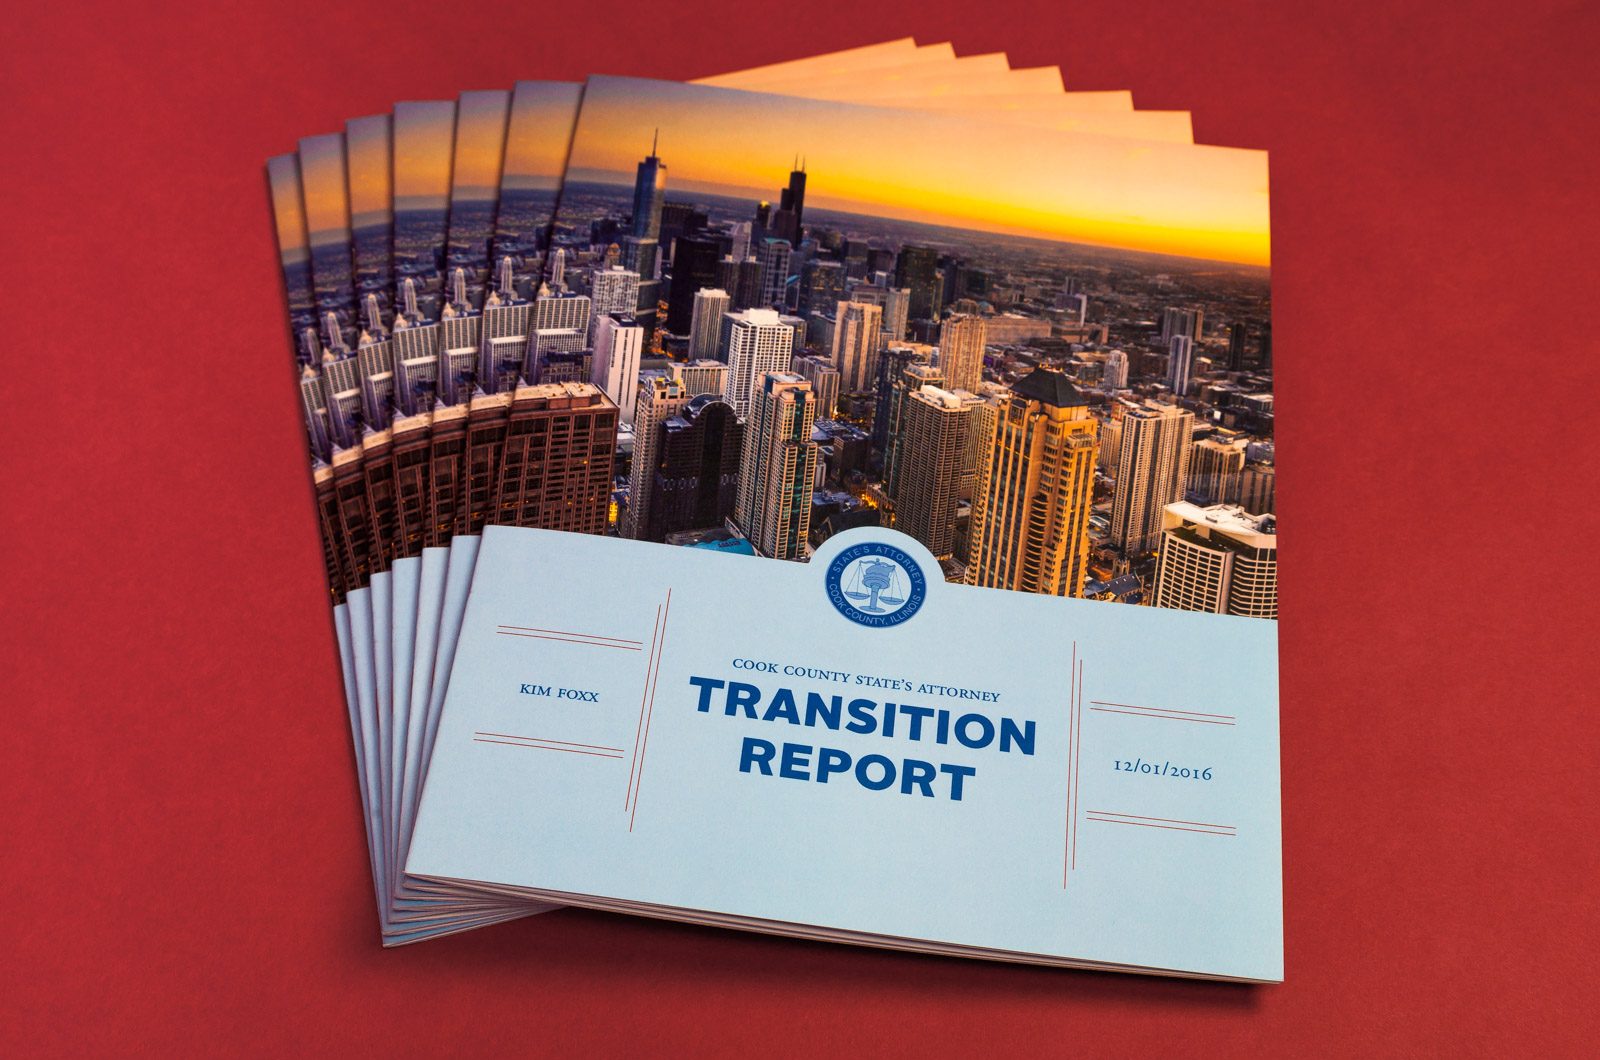 Transition Report Image